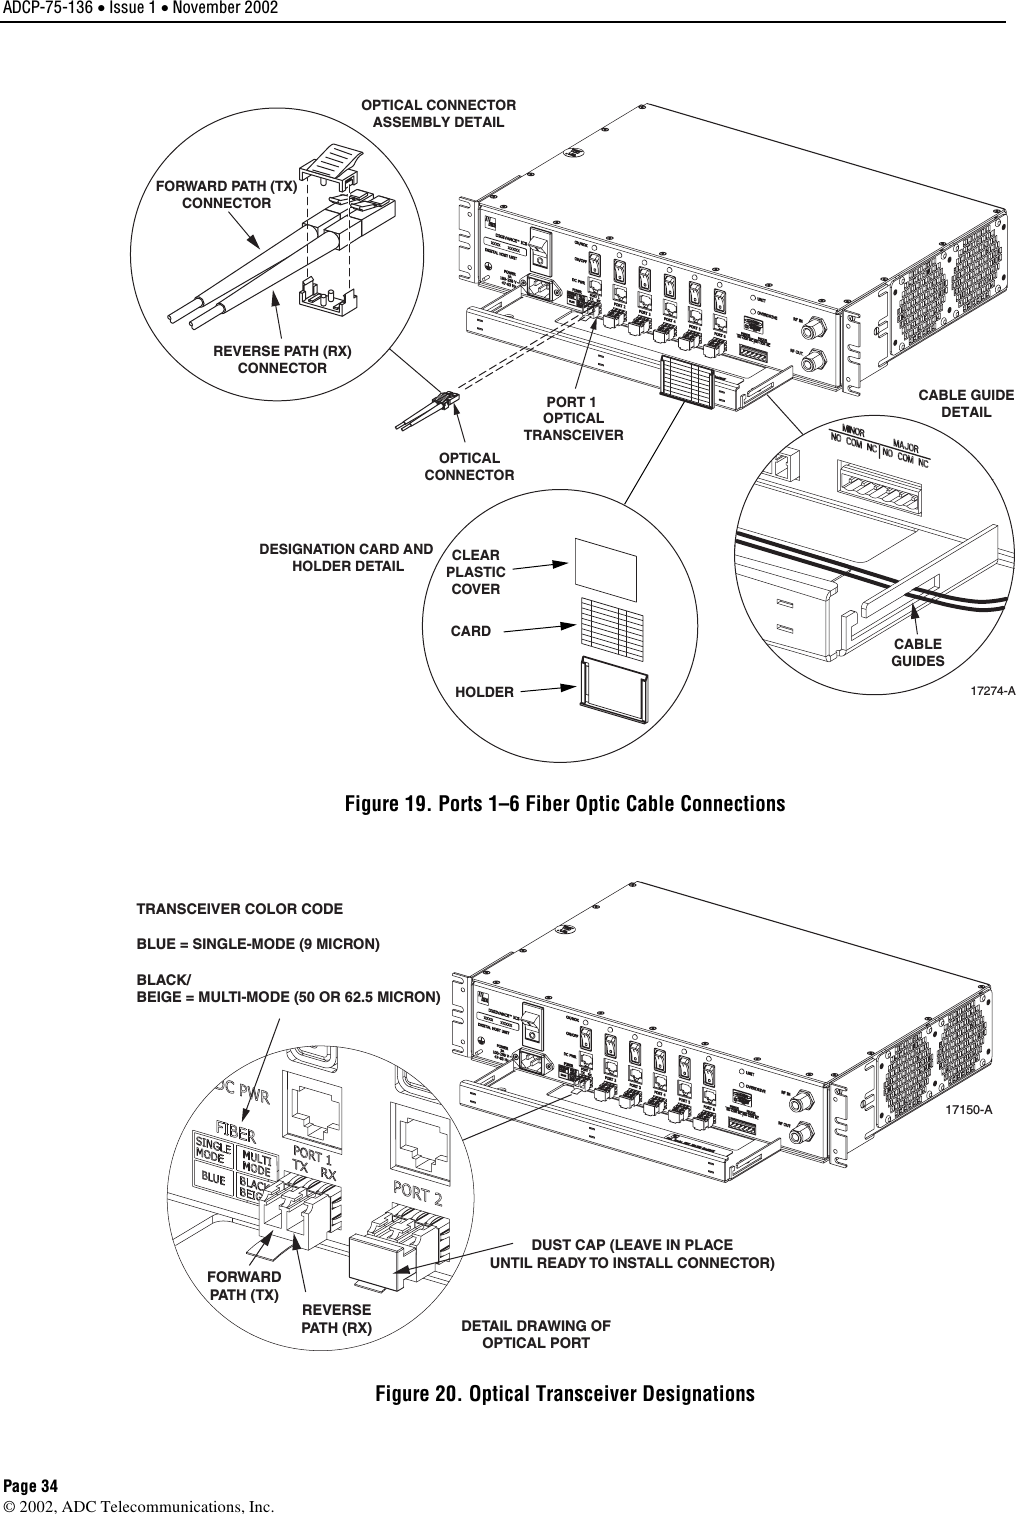 ADCP-75-136 • Issue 1 • November 2002 Page 34 ©2002, ADC Telecommunications, Inc.17274-AREVERSE PATH (RX)CONNECTORFORWARD PATH (TX)CONNECTOROPTICAL CONNECTORASSEMBLY DETAILPORT 1 OPTICALTRANSCEIVEROPTICALCONNECTORCABLEGUIDESCABLE GUIDEDETAILDESIGNATION CARD AND HOLDER DETAILHOLDERCARDCLEARPLASTICCOVERFigure 19. Ports 1–6 Fiber Optic Cable Connections 17150-ADETAIL DRAWING OFOPTICAL PORTREVERSEPATH (RX)FORWARDPATH (TX)DUST CAP (LEAVE IN PLACEUNTIL READY TO INSTALL CONNECTOR)TRANSCEIVER COLOR CODEBLUE = SINGLE-MODE (9 MICRON)BLACK/BEIGE = MULTI-MODE (50 OR 62.5 MICRON)Figure 20. Optical Transceiver Designations 